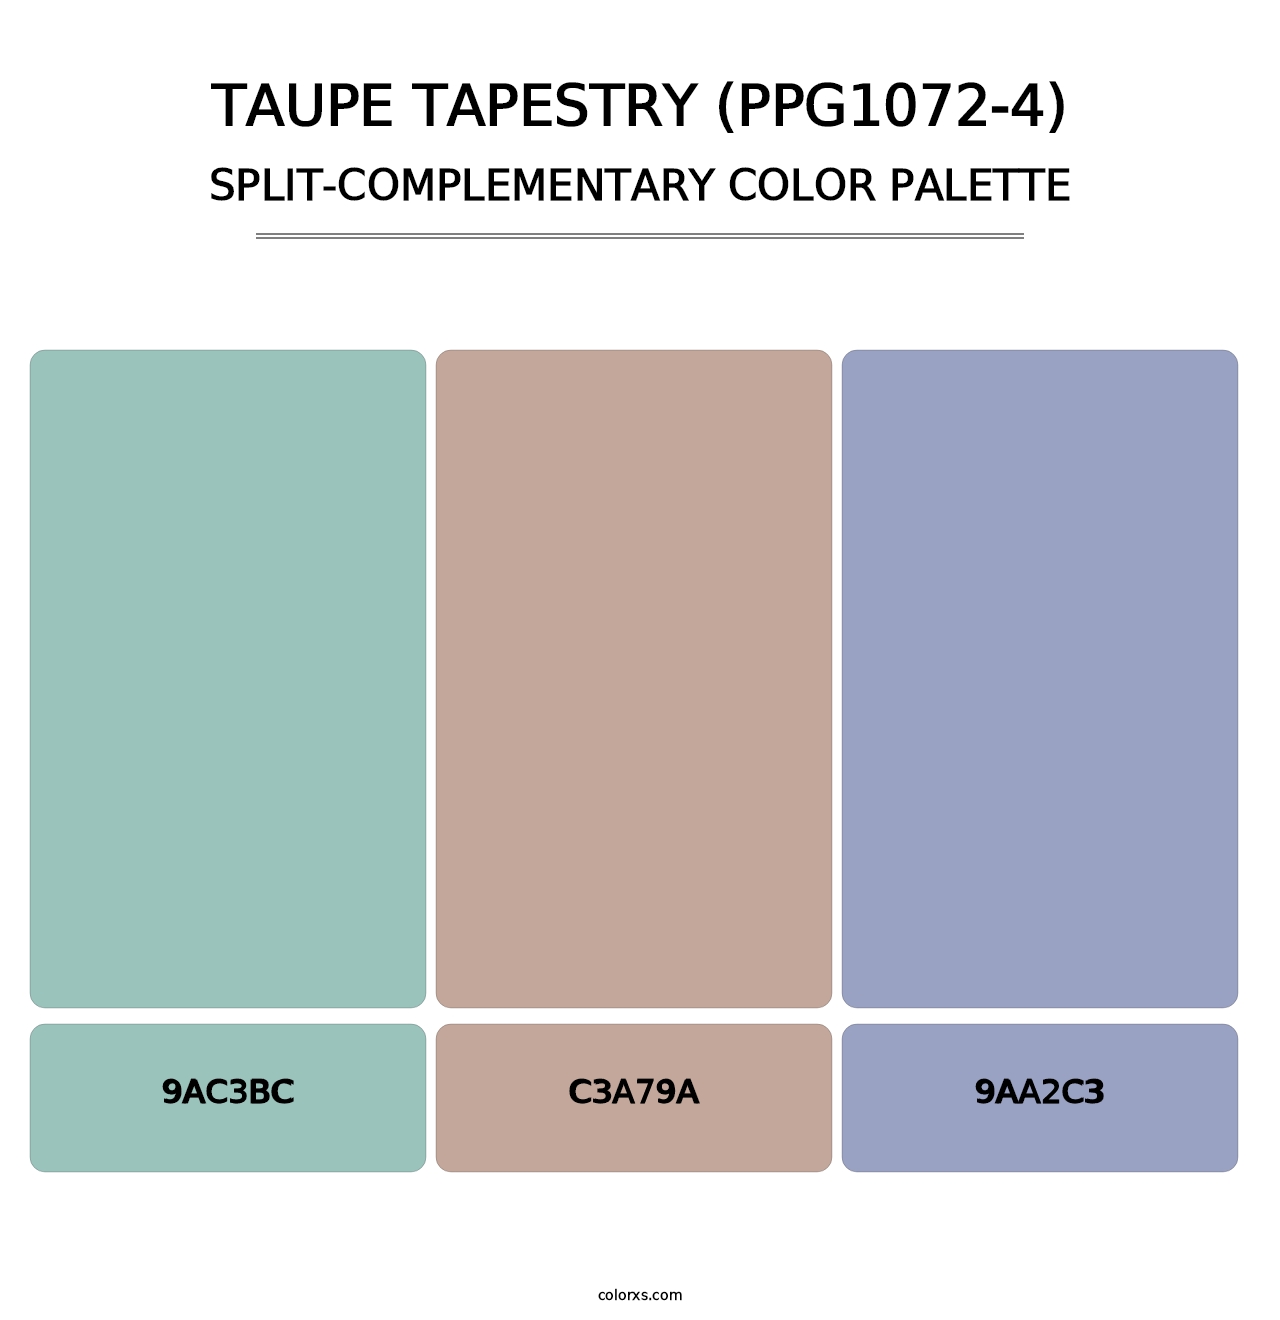 Taupe Tapestry (PPG1072-4) - Split-Complementary Color Palette